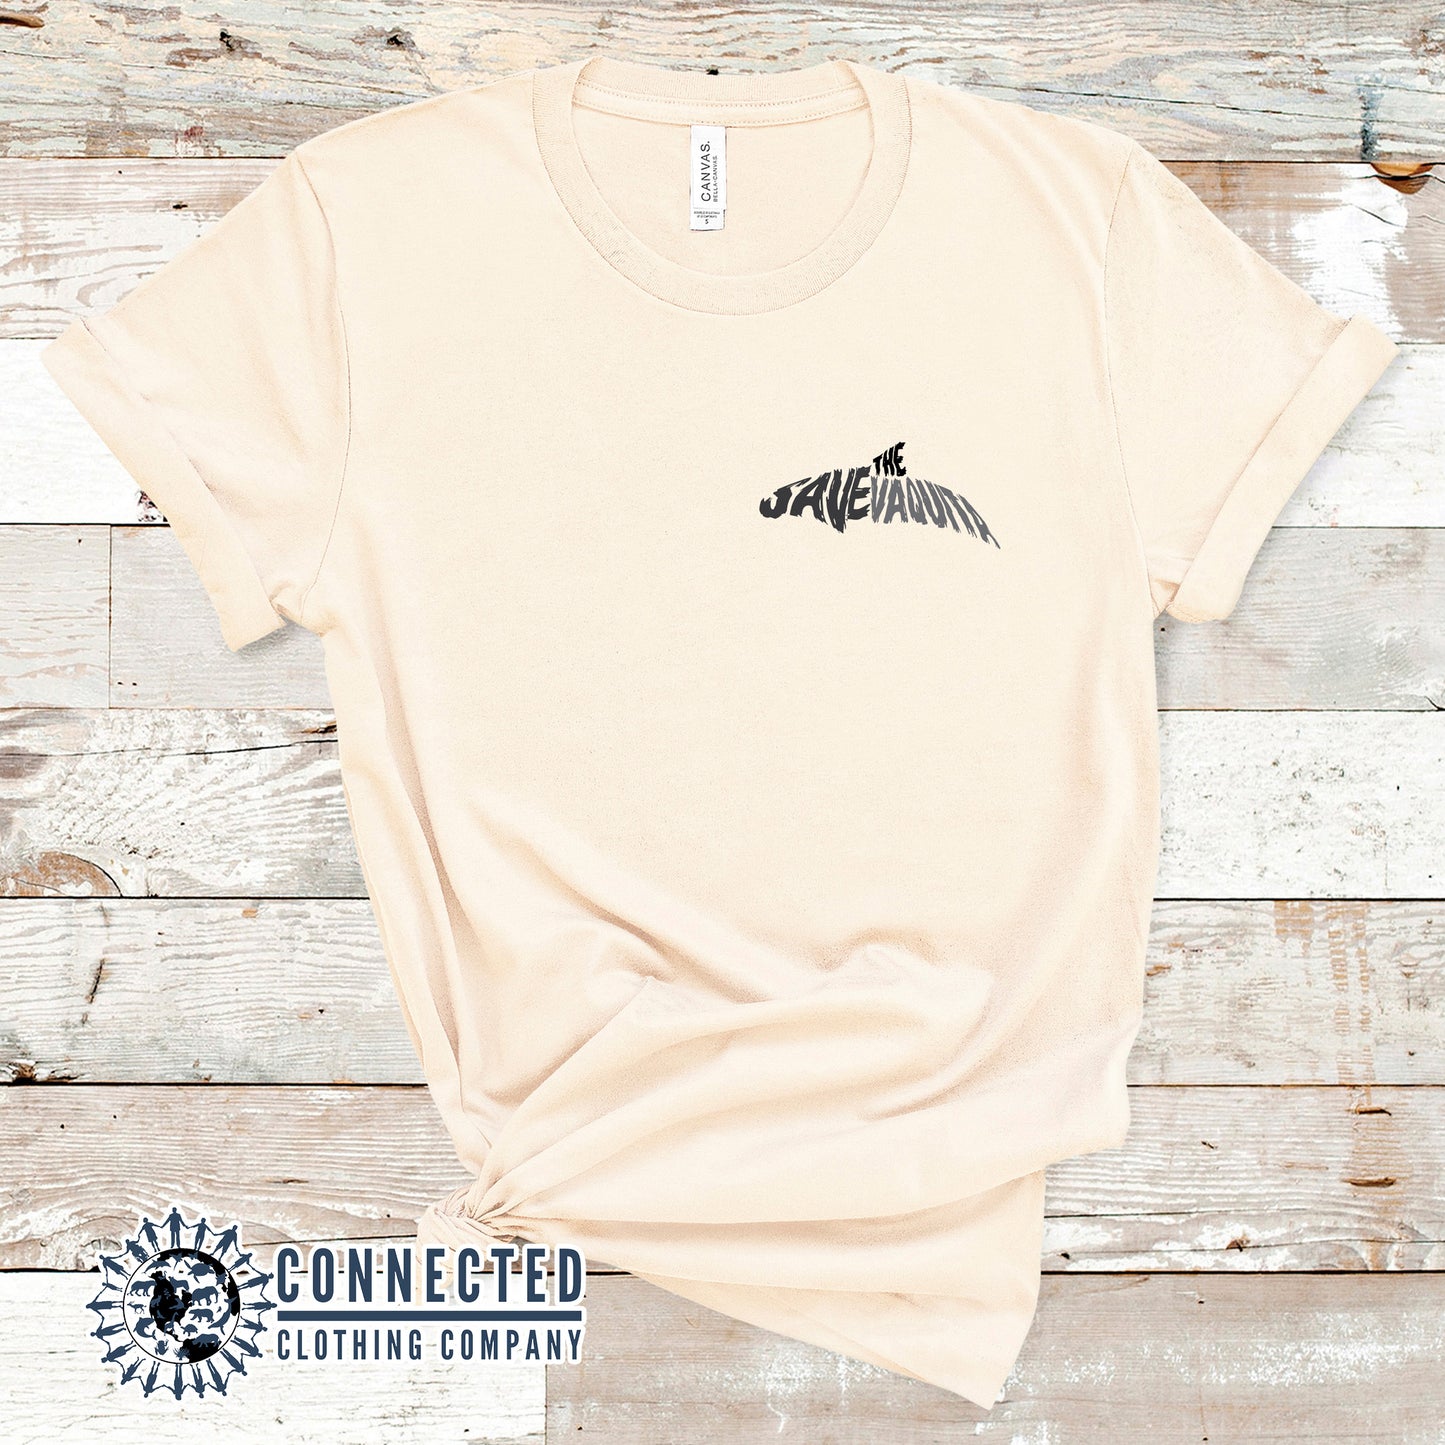 Soft Cream Save The Vaquita Short-Sleeve Tee - Connected Clothing Company - Ethically & Sustainably Made - 10% of profits donated to vaquita porpoise conservation